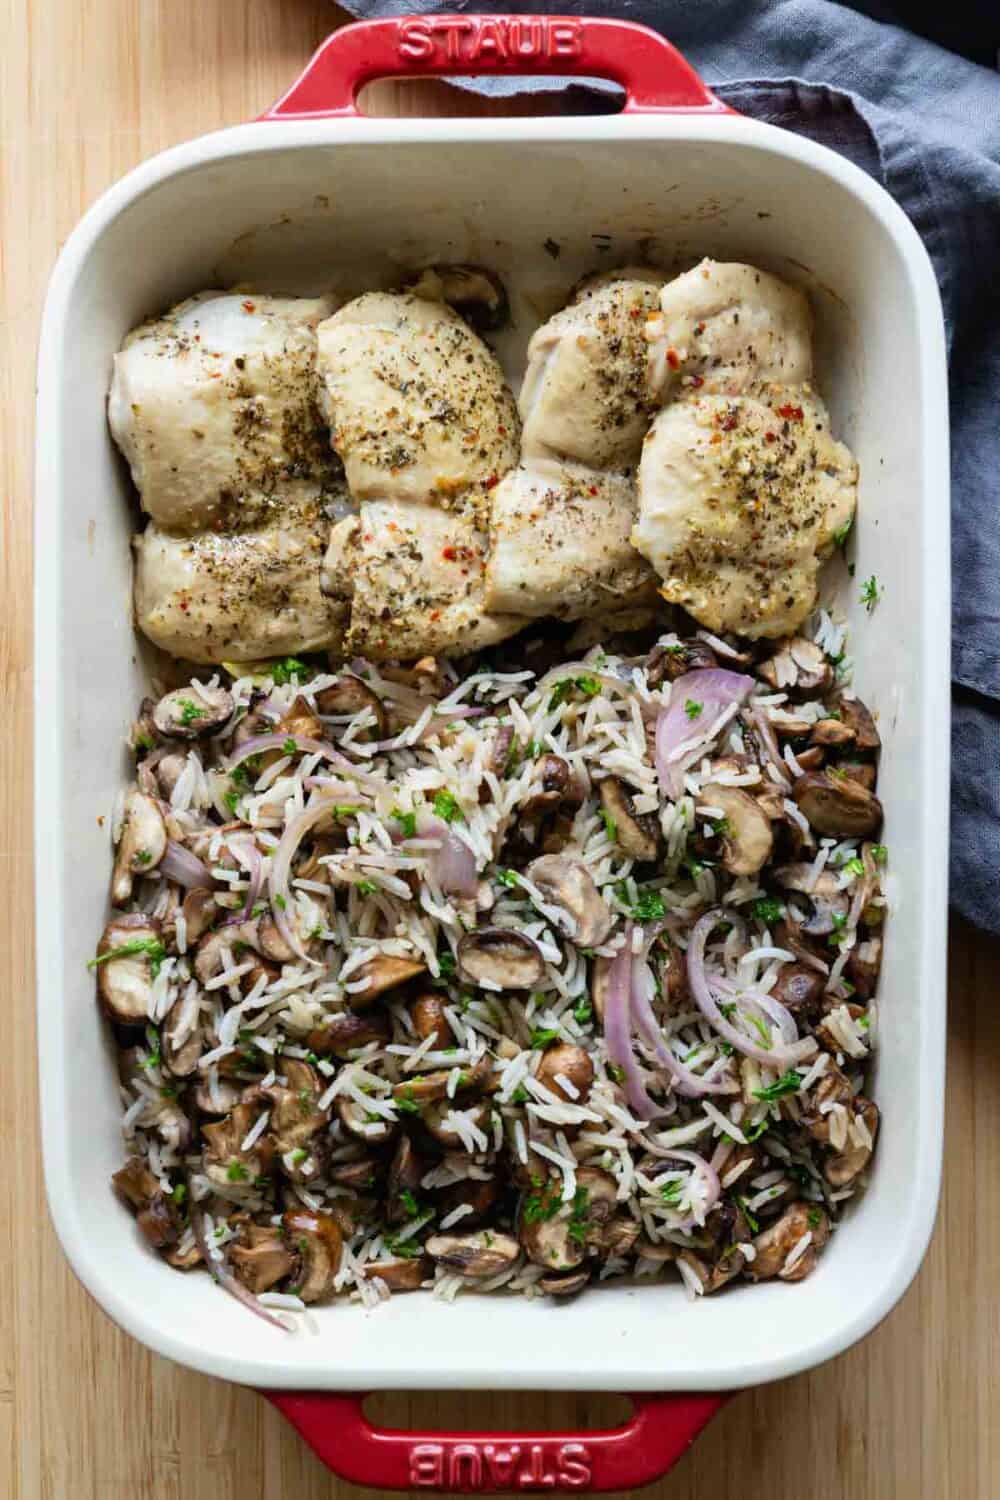 Mushroom rice and baked chicken breasts in a red and white baking dish.